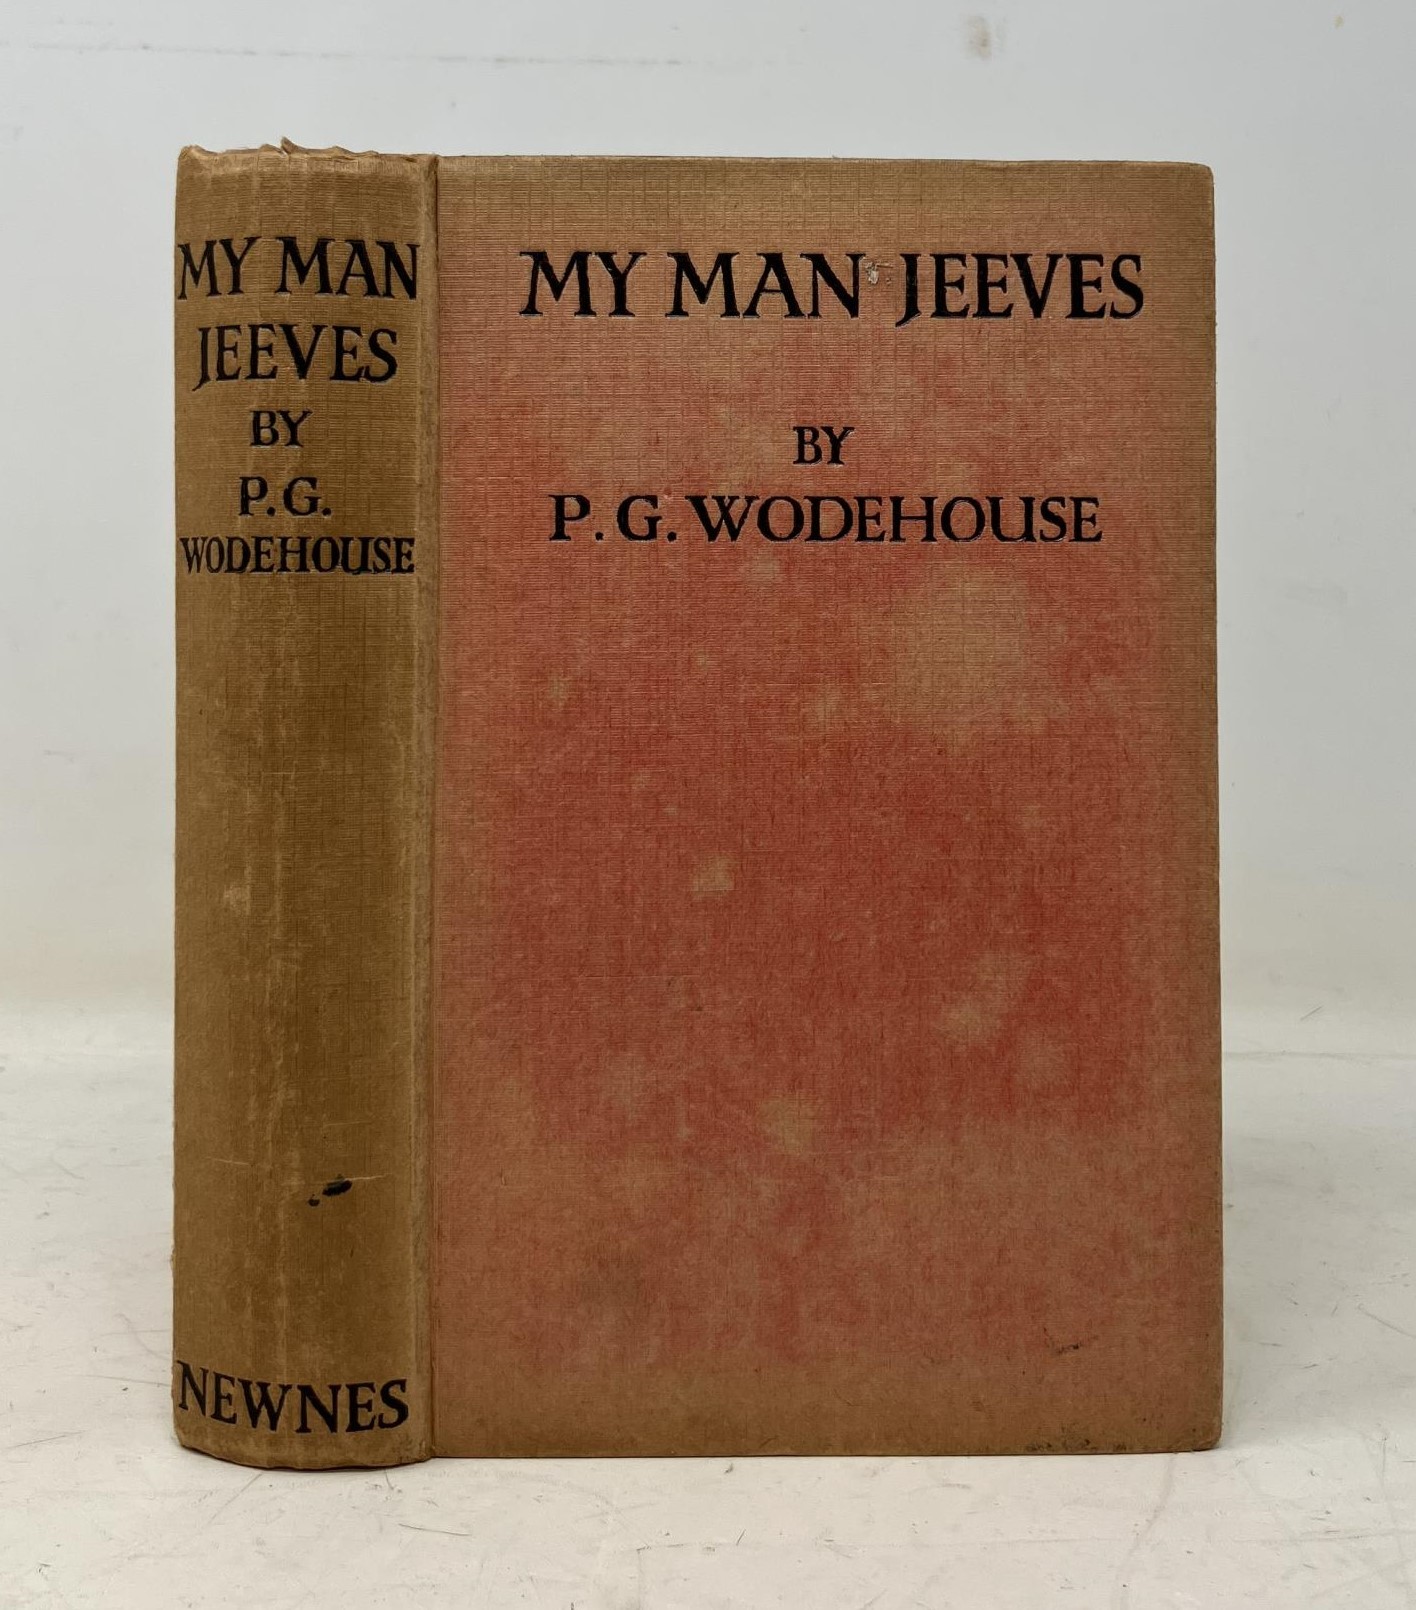 Wodehouse (P G), My Man Jeeves, and assorted other works by P G Woodhouse (2 boxes) First printings: